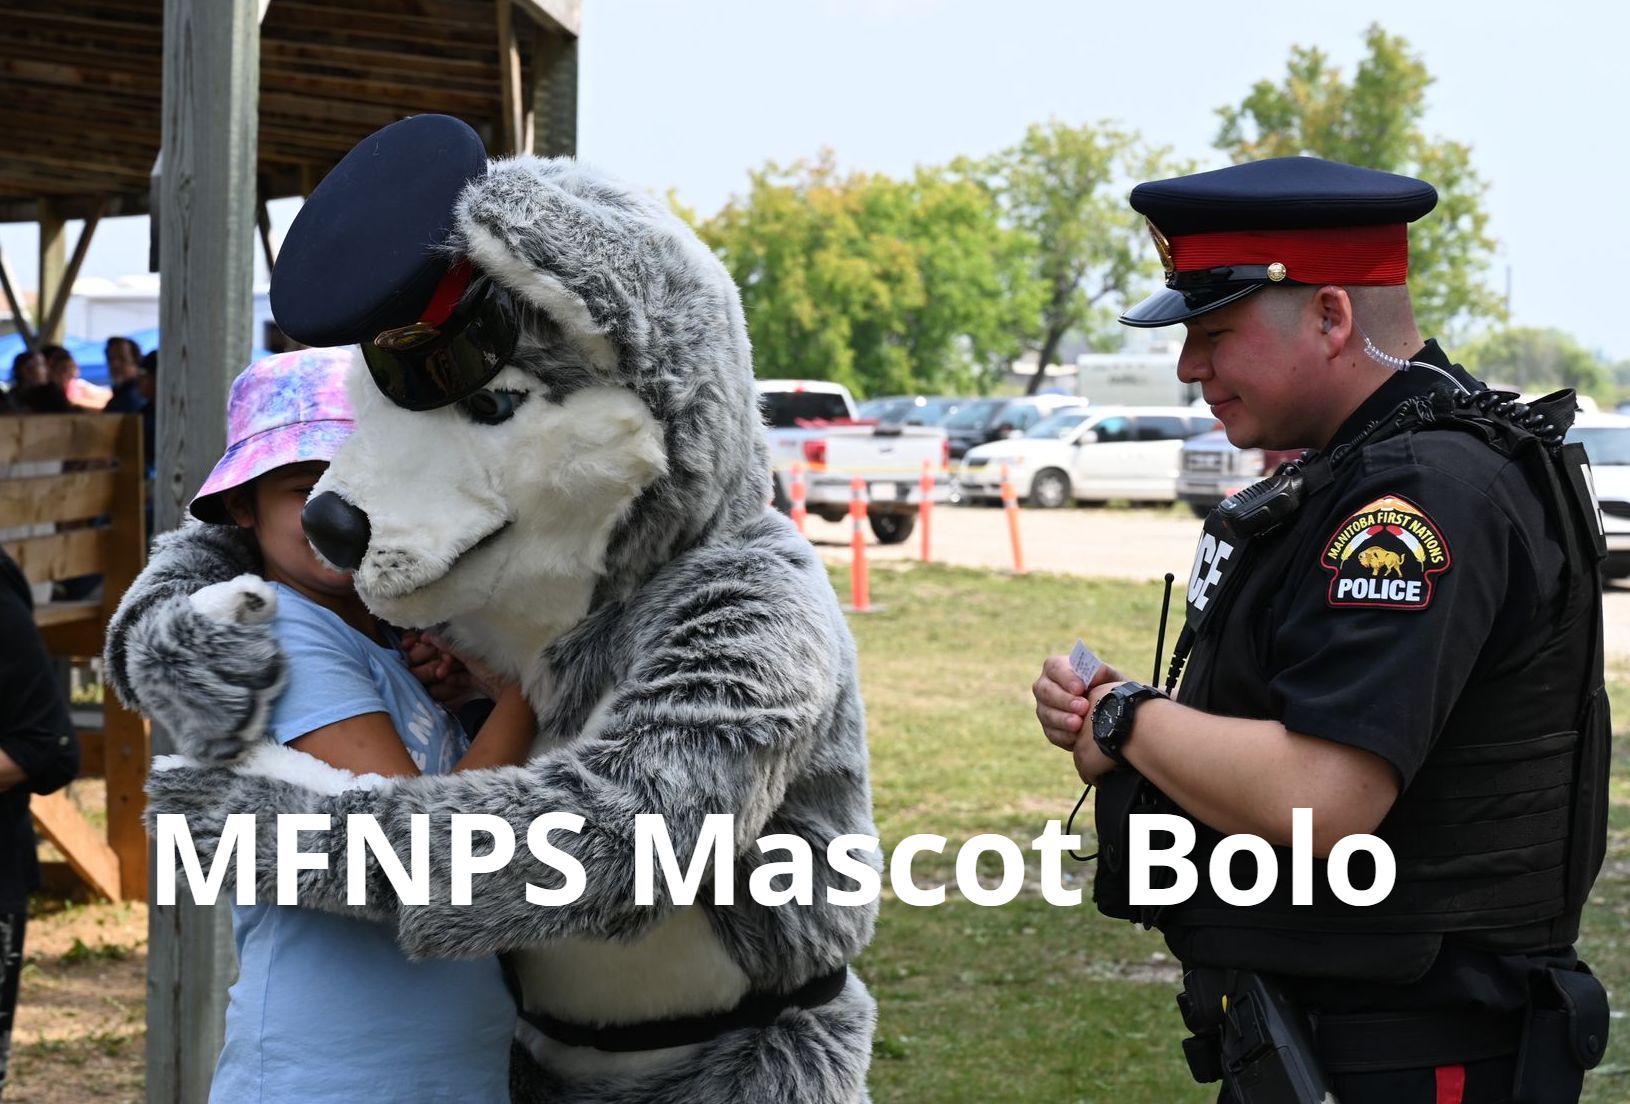 MFNPS-Manitoba First Nations Police Service - Mascot Bolo